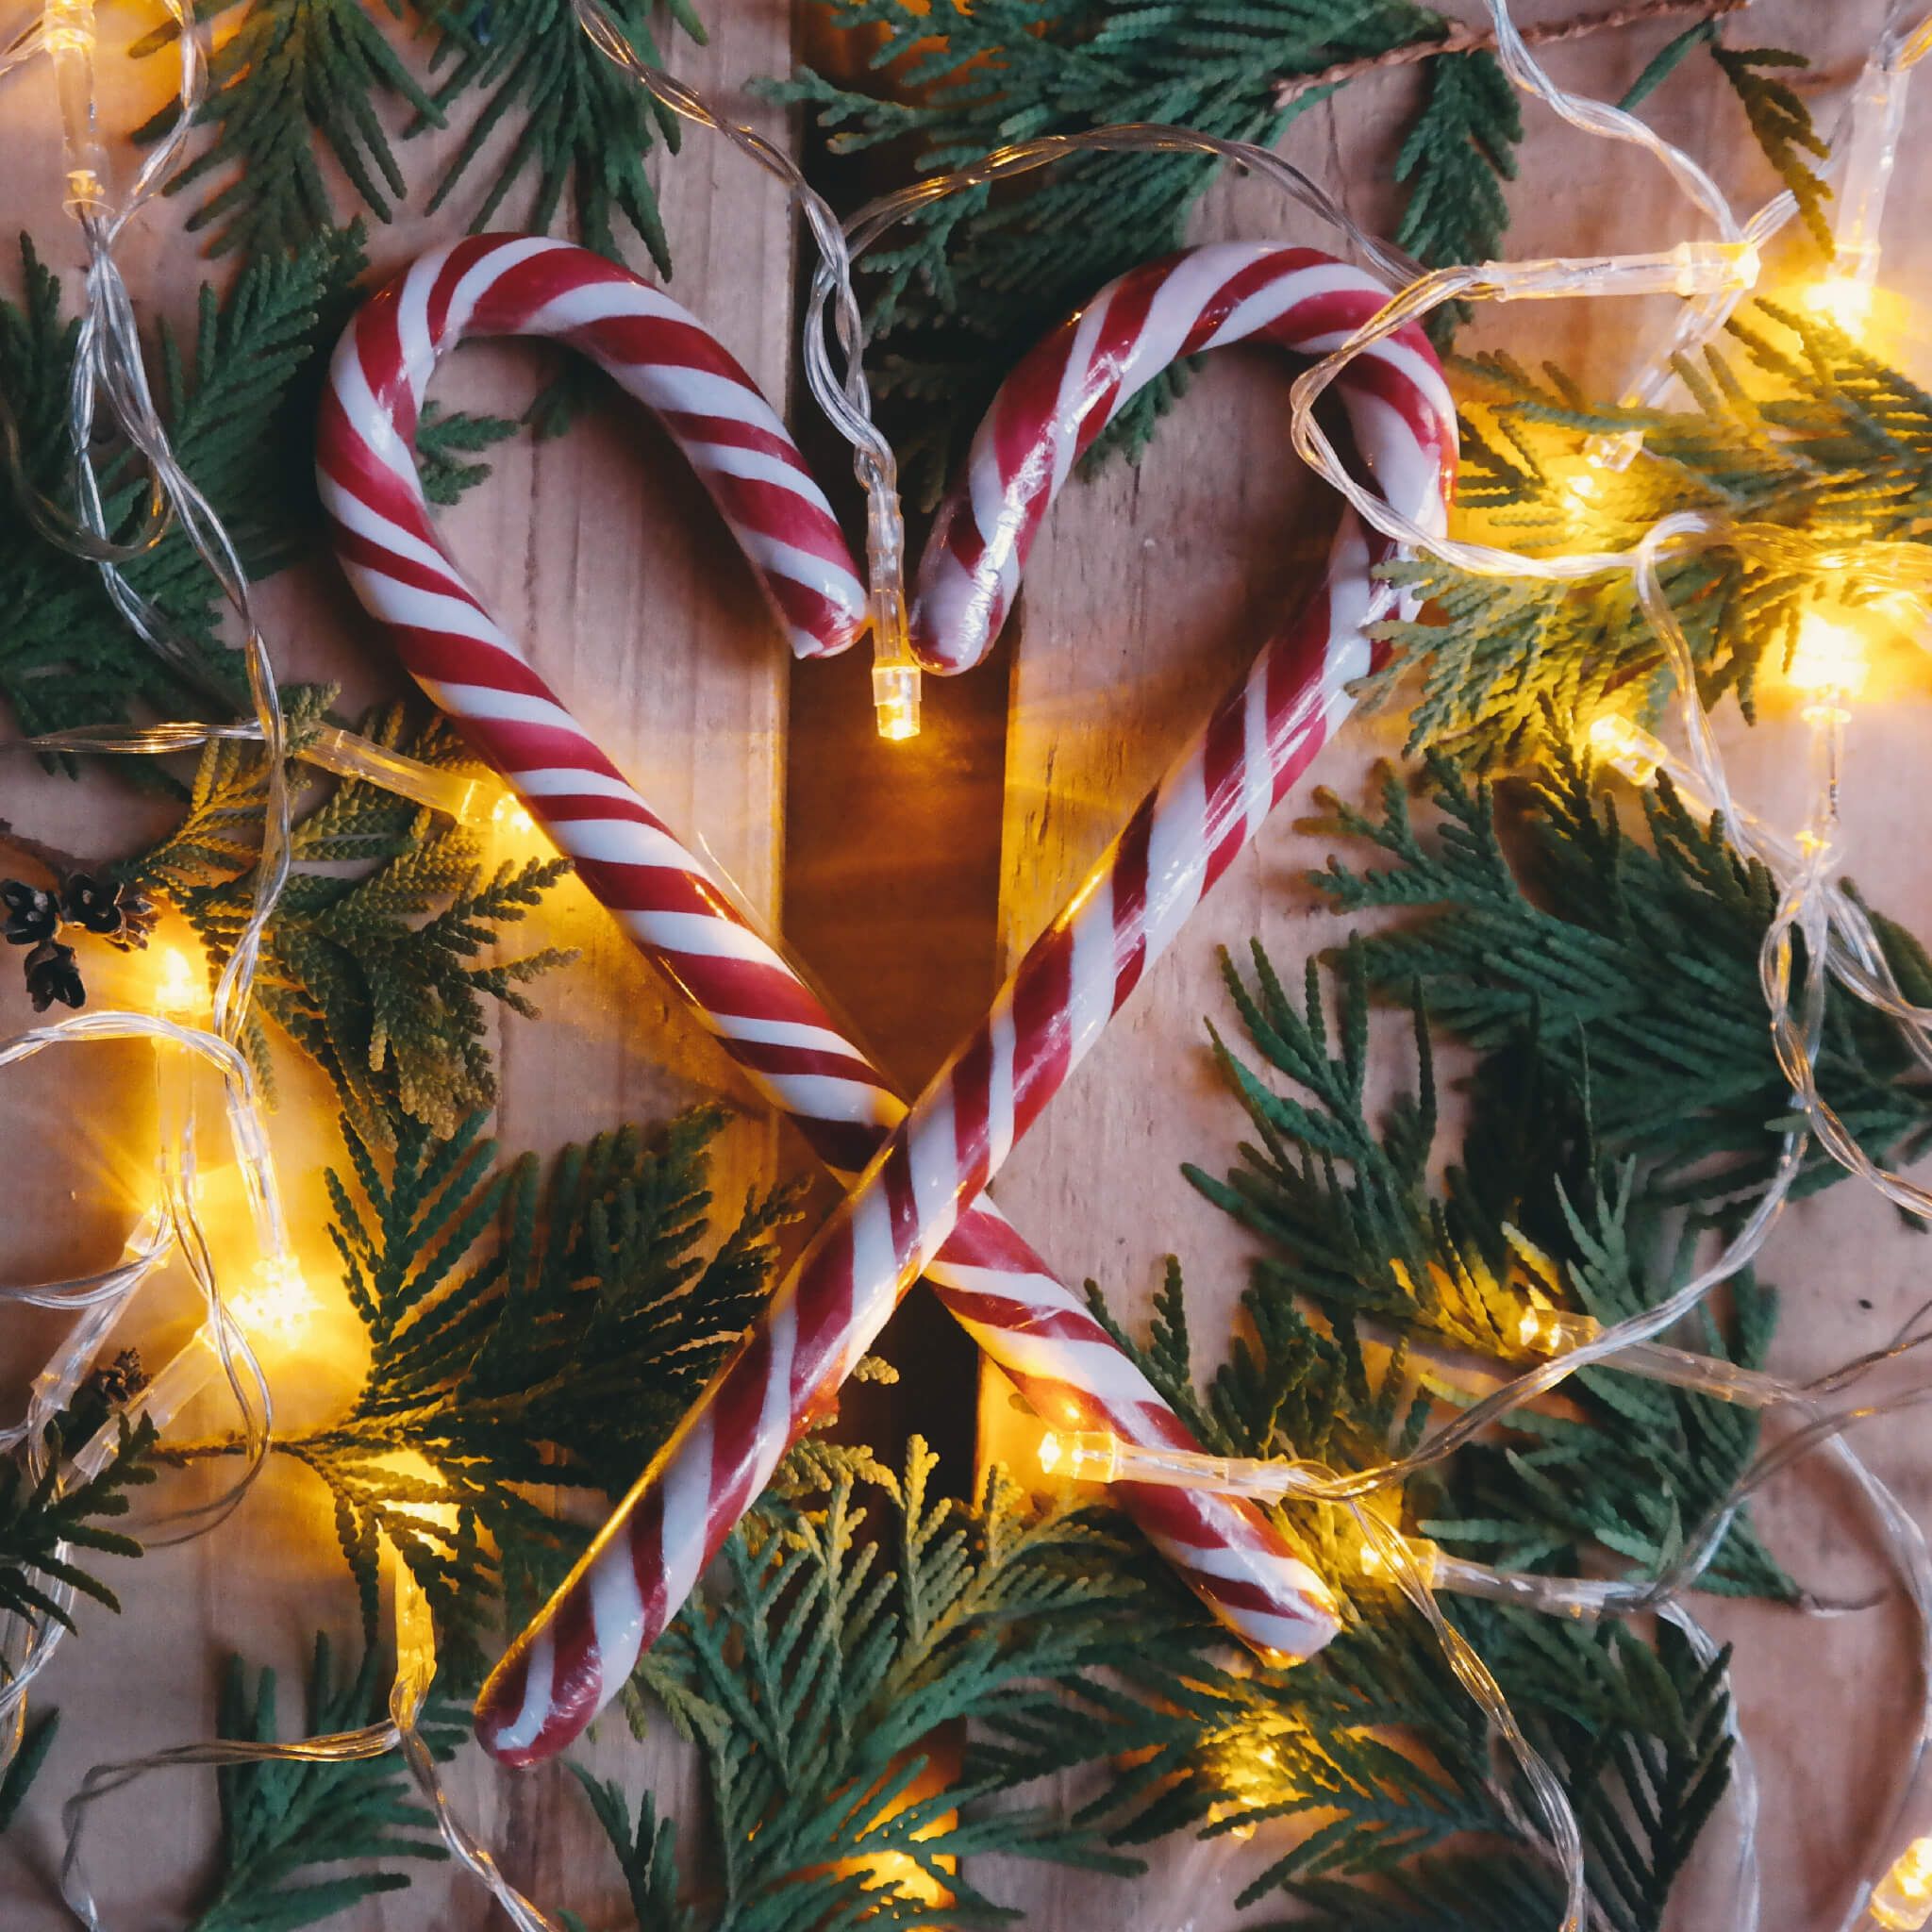 A heart made out of candy canes surrounded by Christmas lights - Candy cane